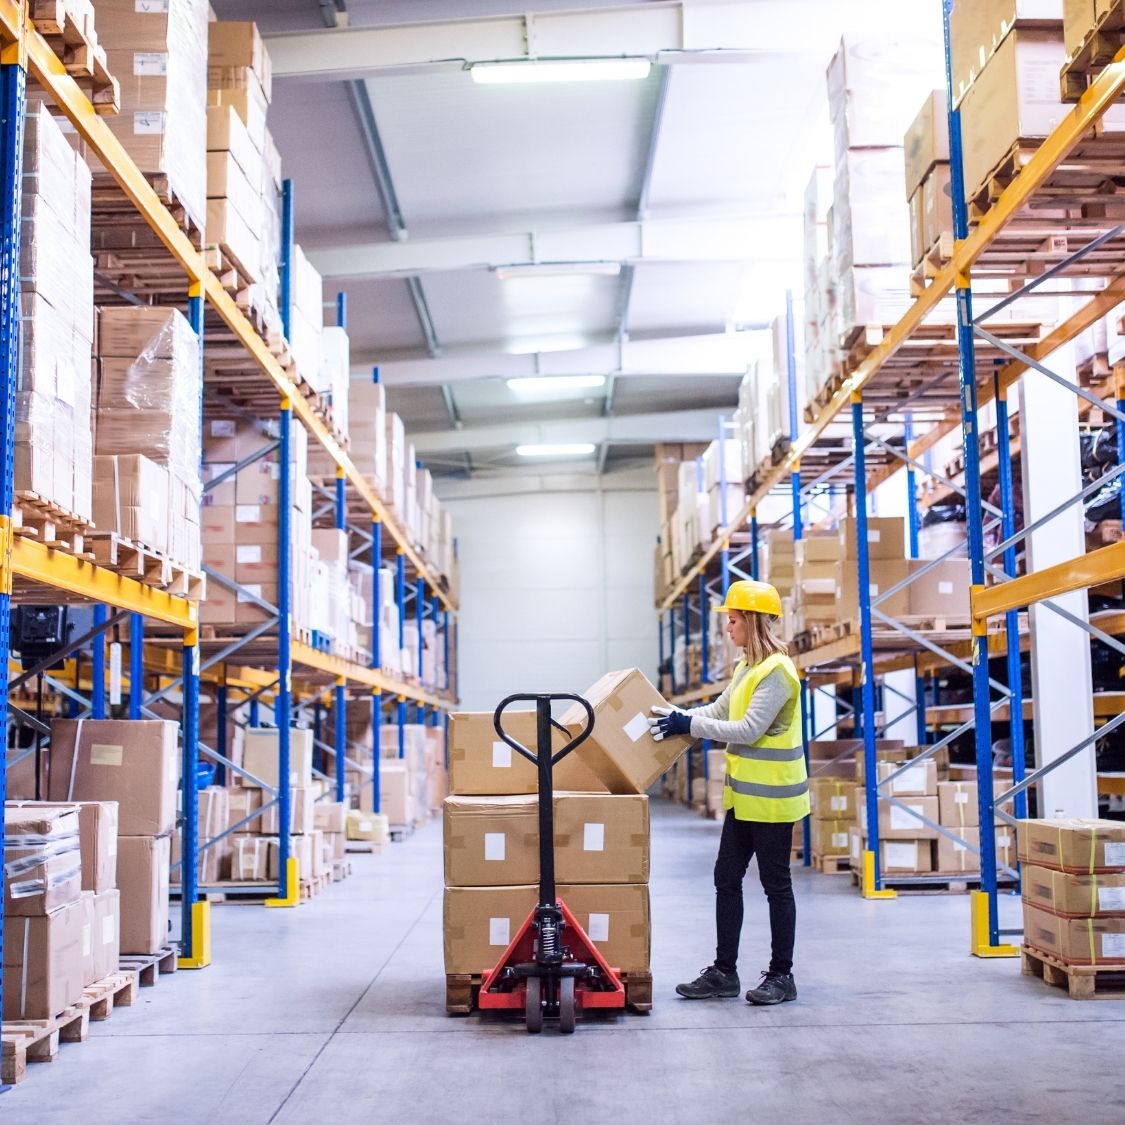 What You Should Know About Working in a Warehouse